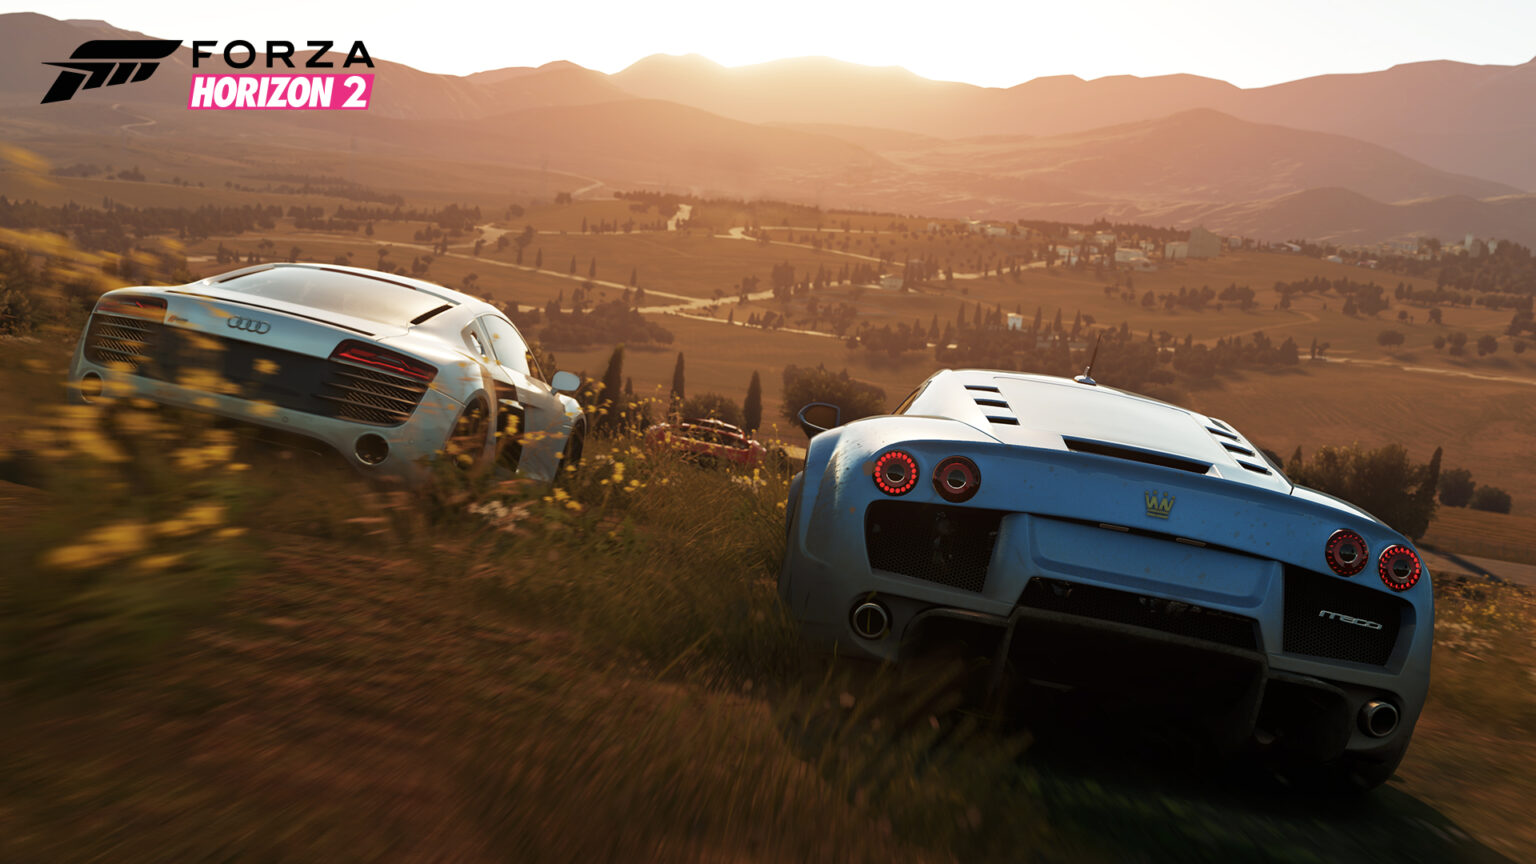 can i download forza horizon 2 pc because i bought it on xbox